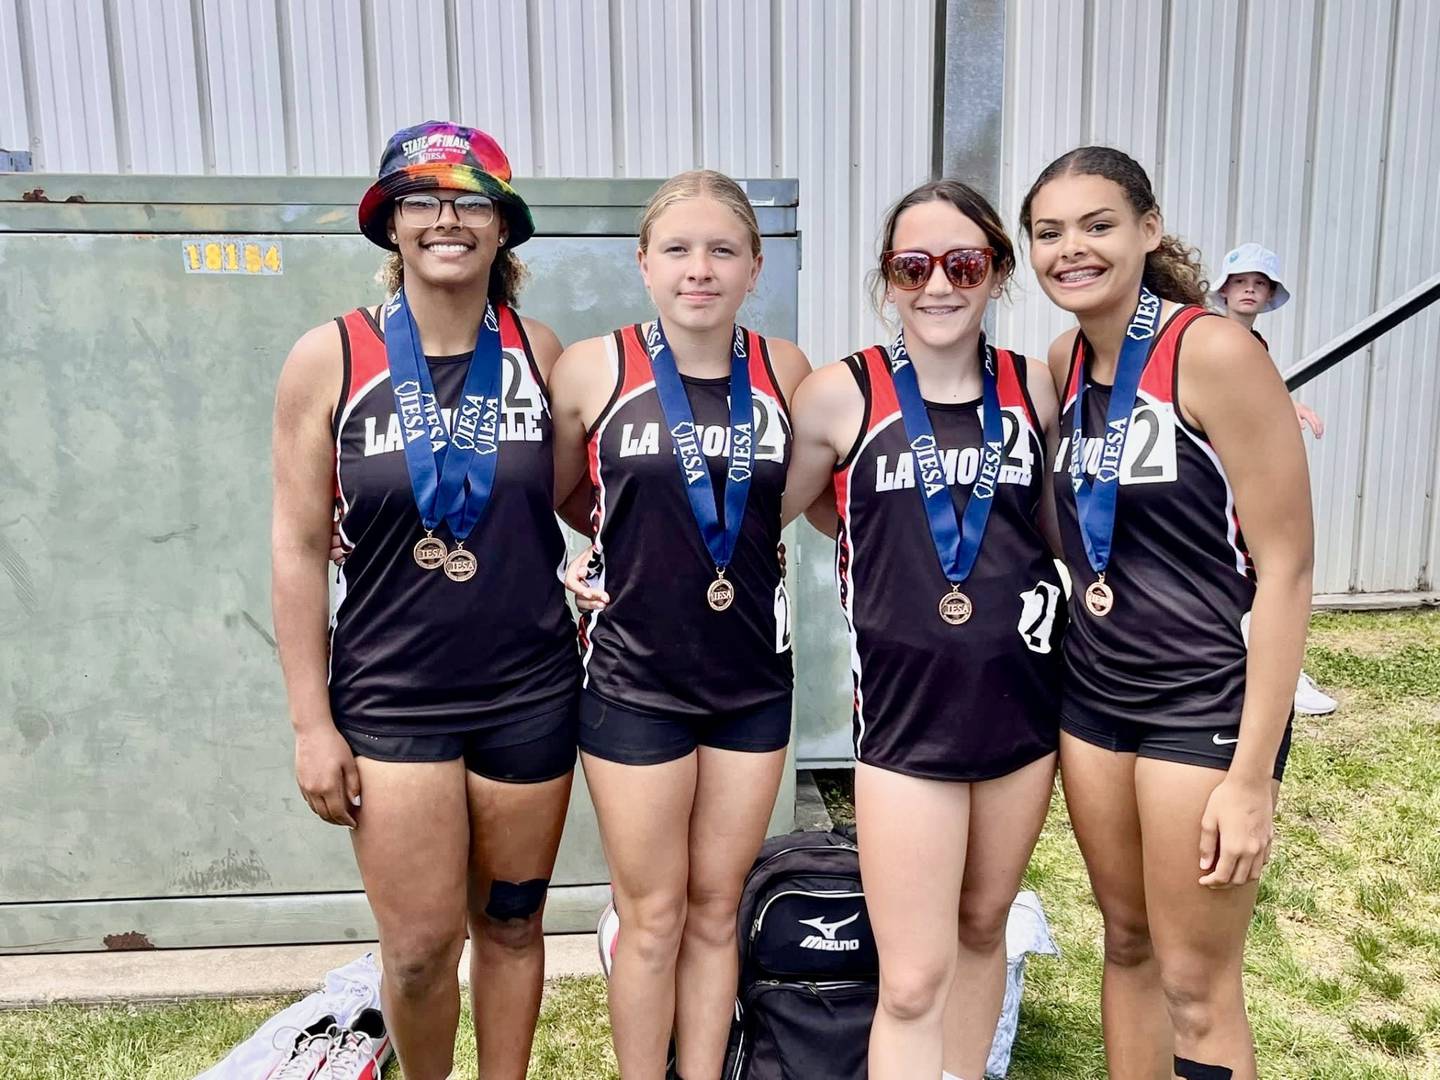 The LaMoille eighth-grade 4x100 relay of Olivia Glasper, Alexis Flanagan, Kijah Lucas and Jena Monroe placed fourth (55.18) in the IESA Class 1A State Track & Field Meet.